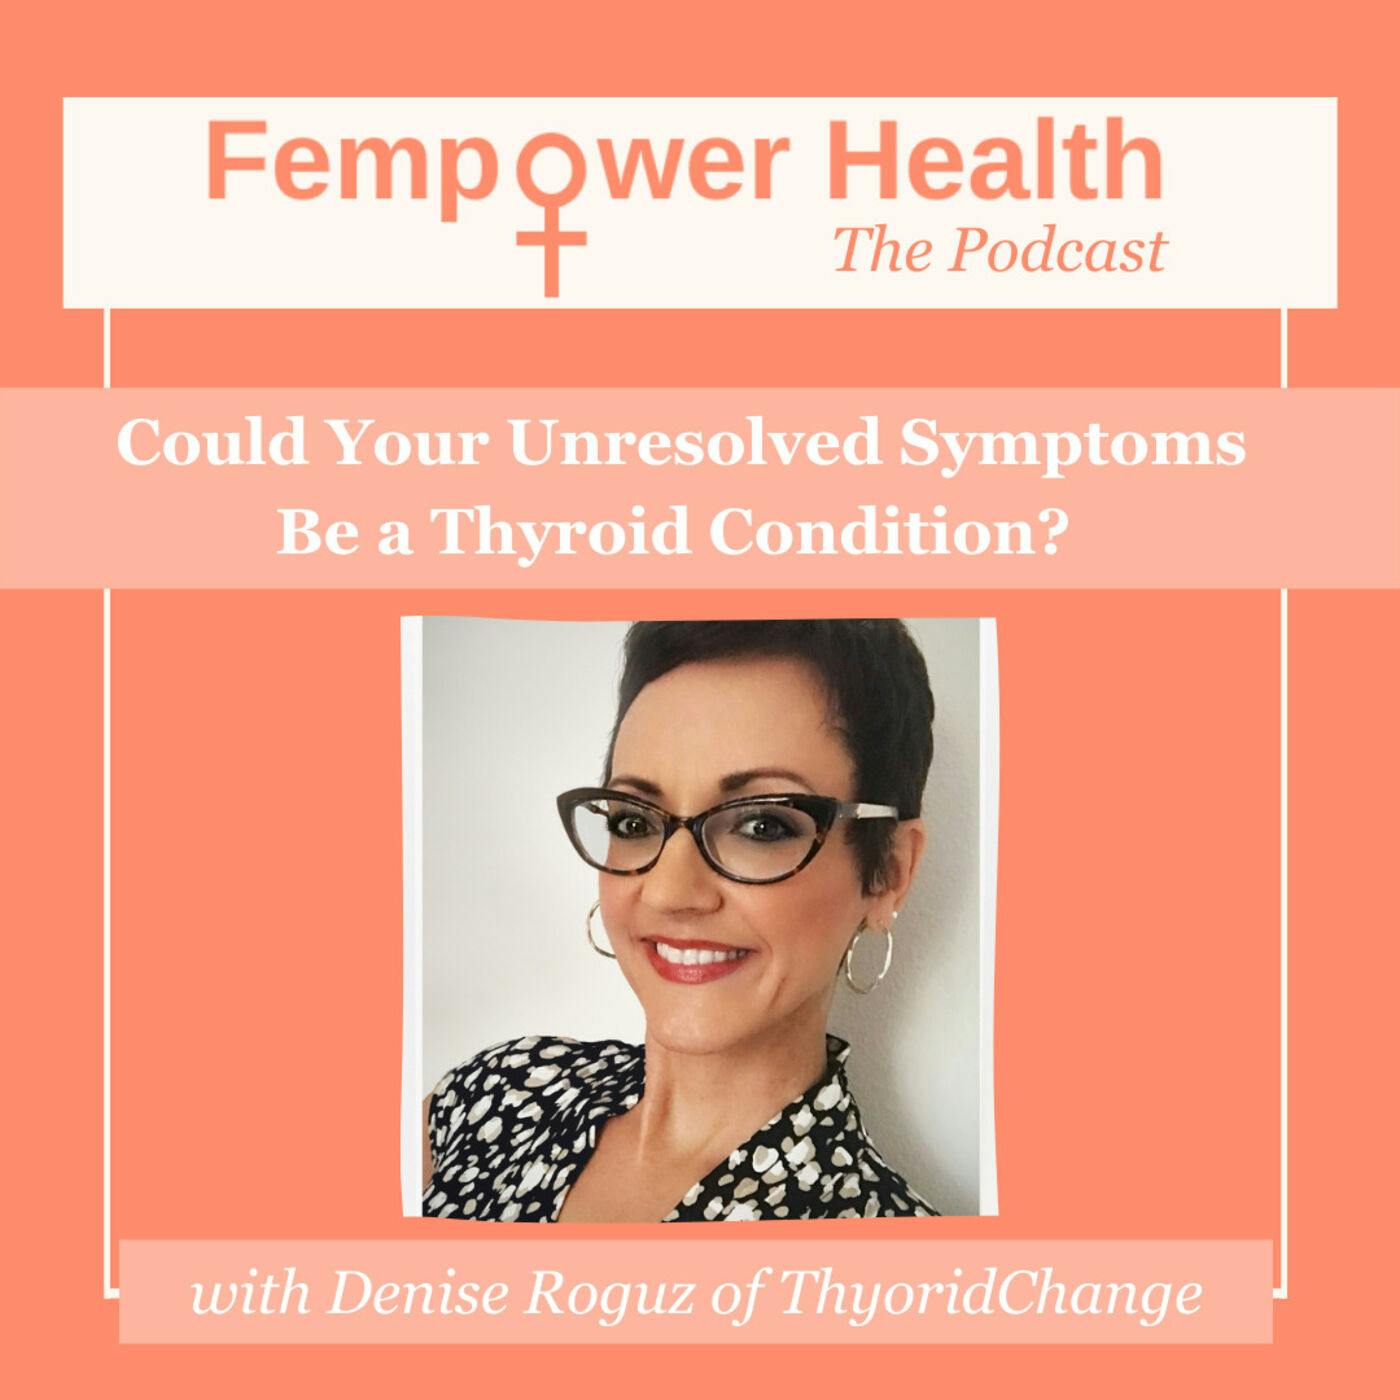 Denise Roguz | Could Your Unresolved Symptoms Be a Thyroid Condition?